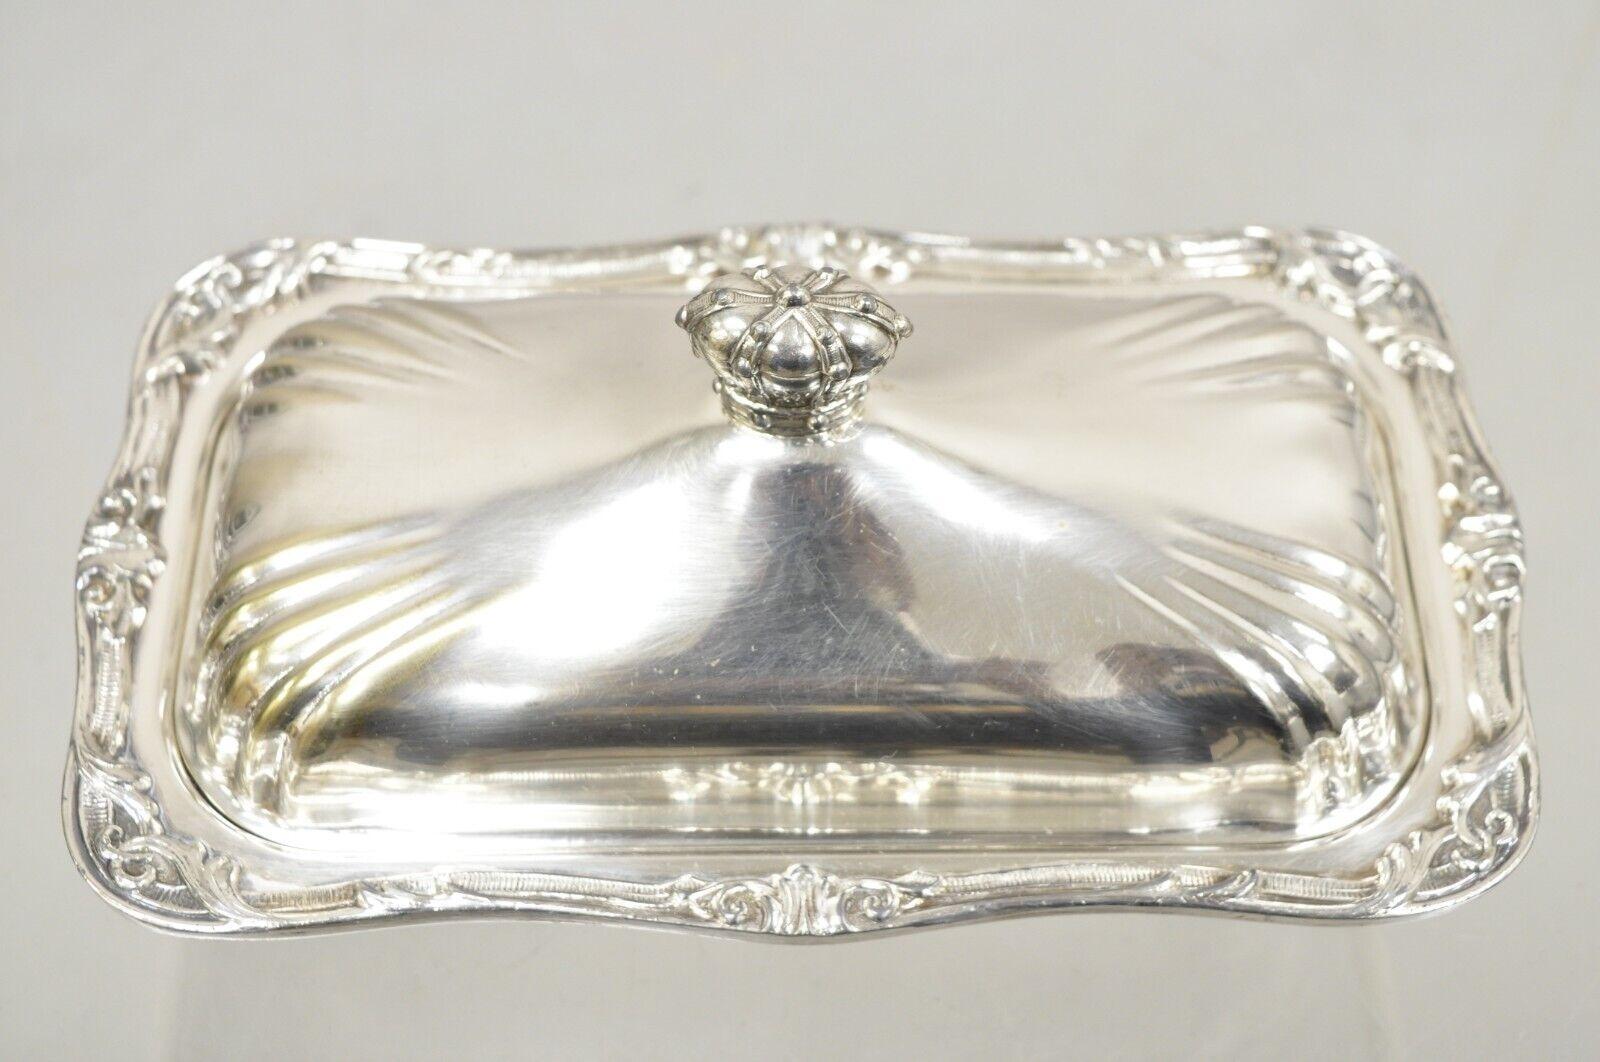 Vintage Coronet Silver Victorian Silver Plated Covered Butter Dish Crown Handle In Good Condition For Sale In Philadelphia, PA